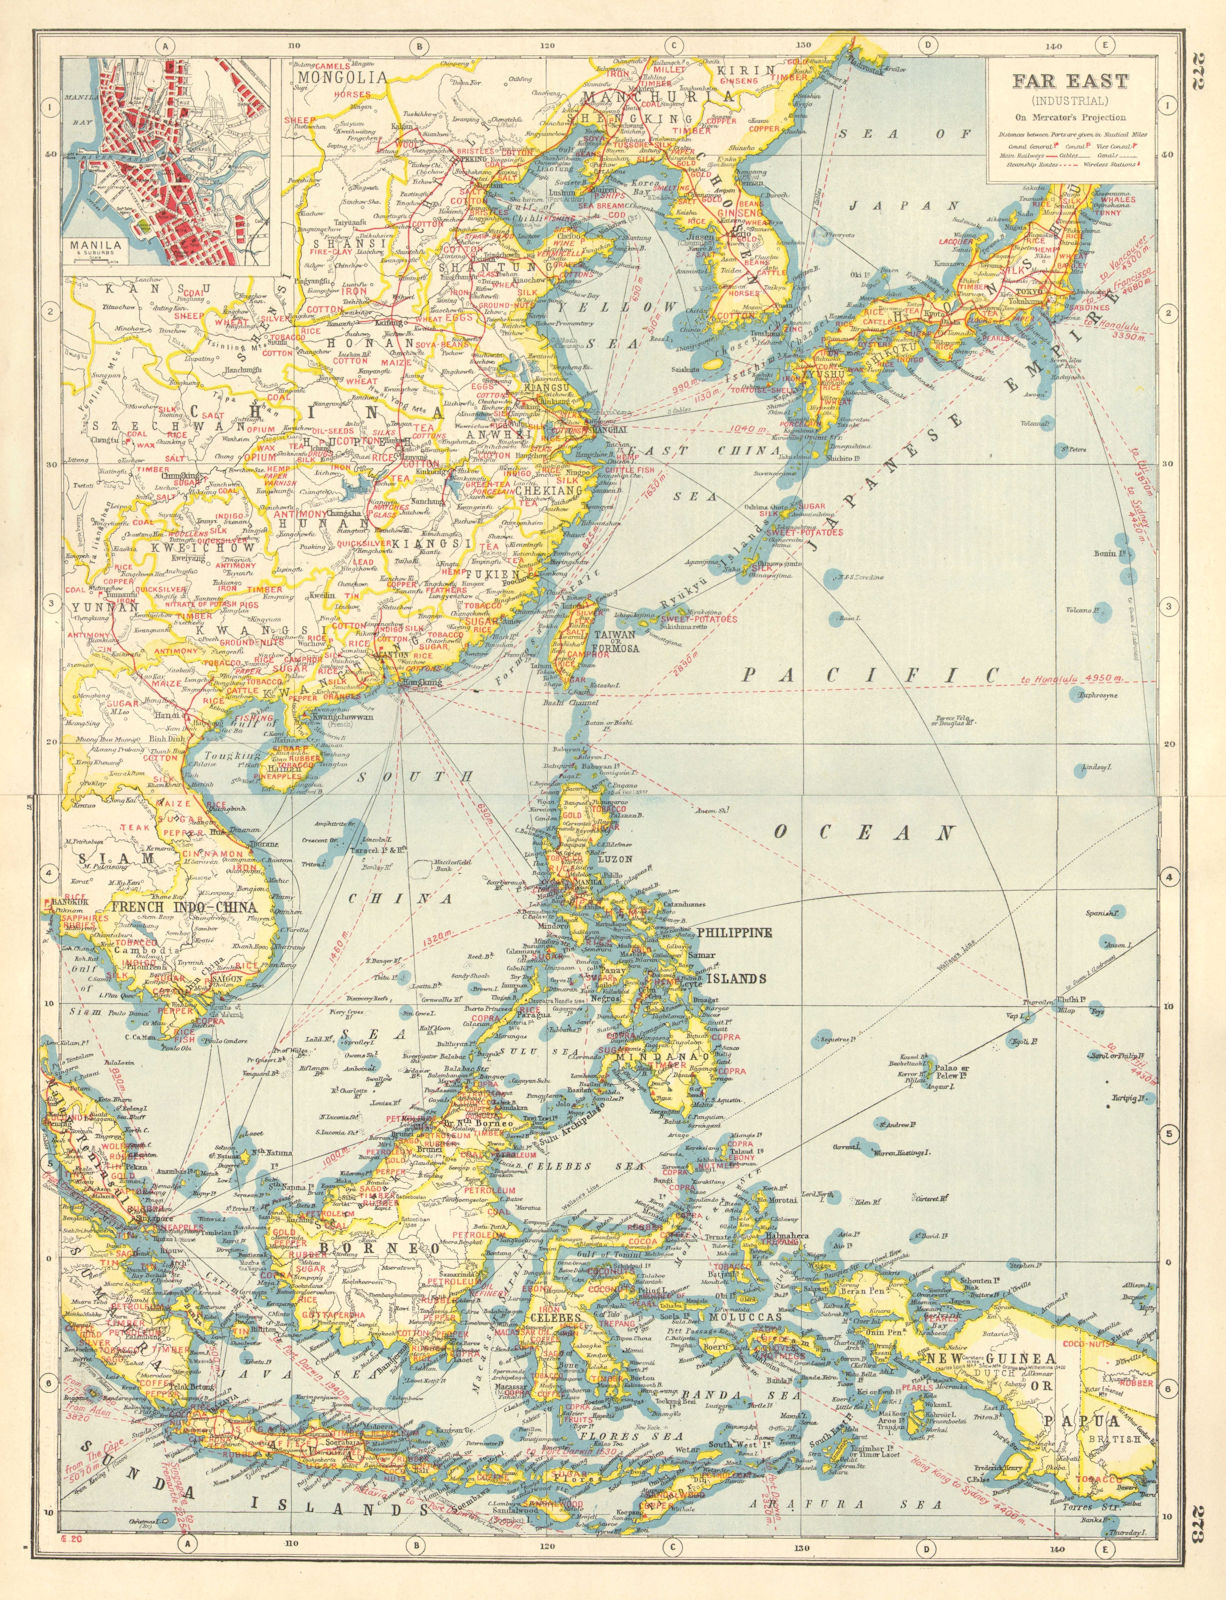 EAST ASIA INDUSTRIES. China Korea East Indies Philippines. Manila plan 1920 map